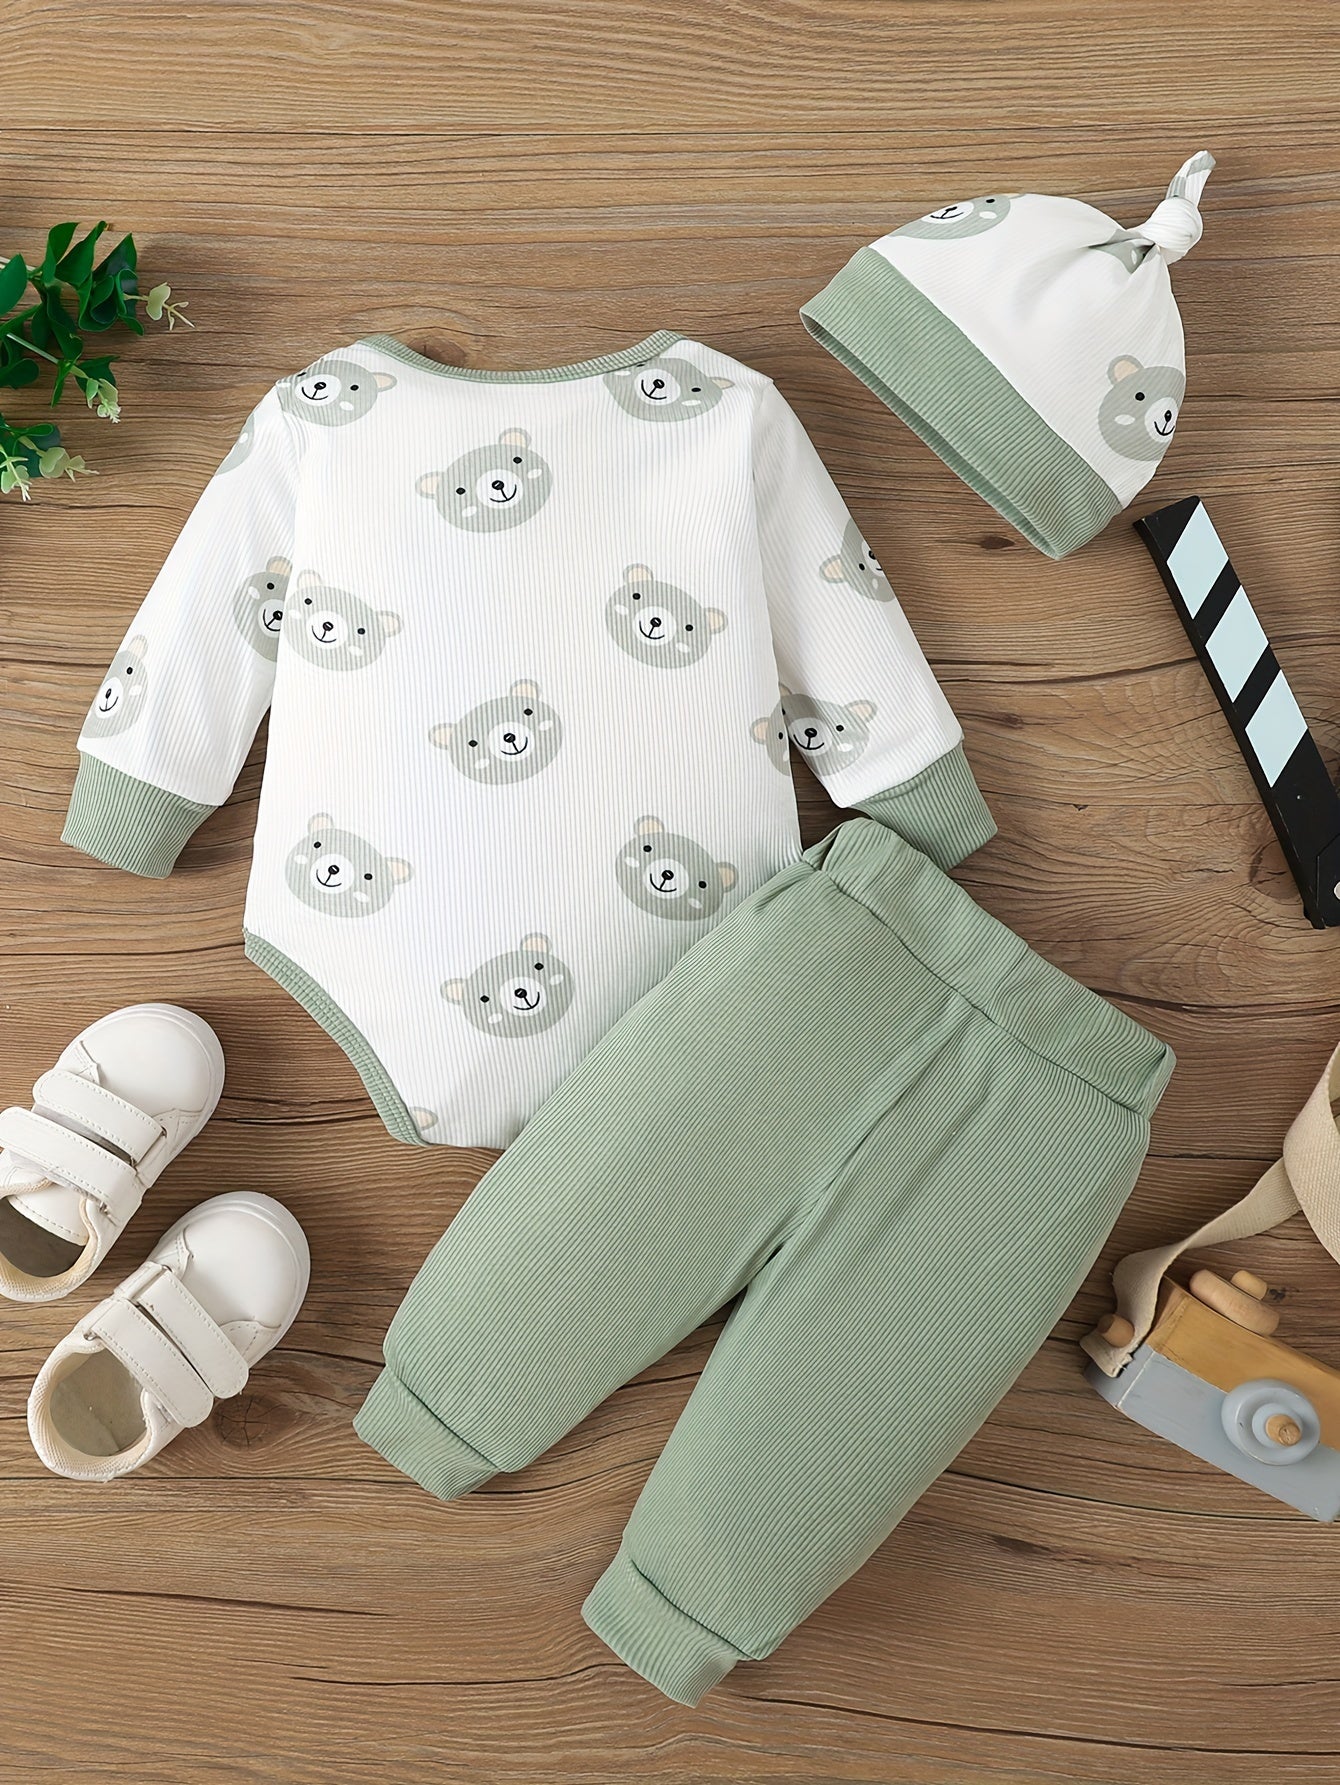 Three - Piece Newborn Set - Adorable Bear - Print Triangle Romper, Cozy Trousers & Matching Hat - Perfect Soft Ensemble for Everyday Comfort - Ammpoure Wellbeing